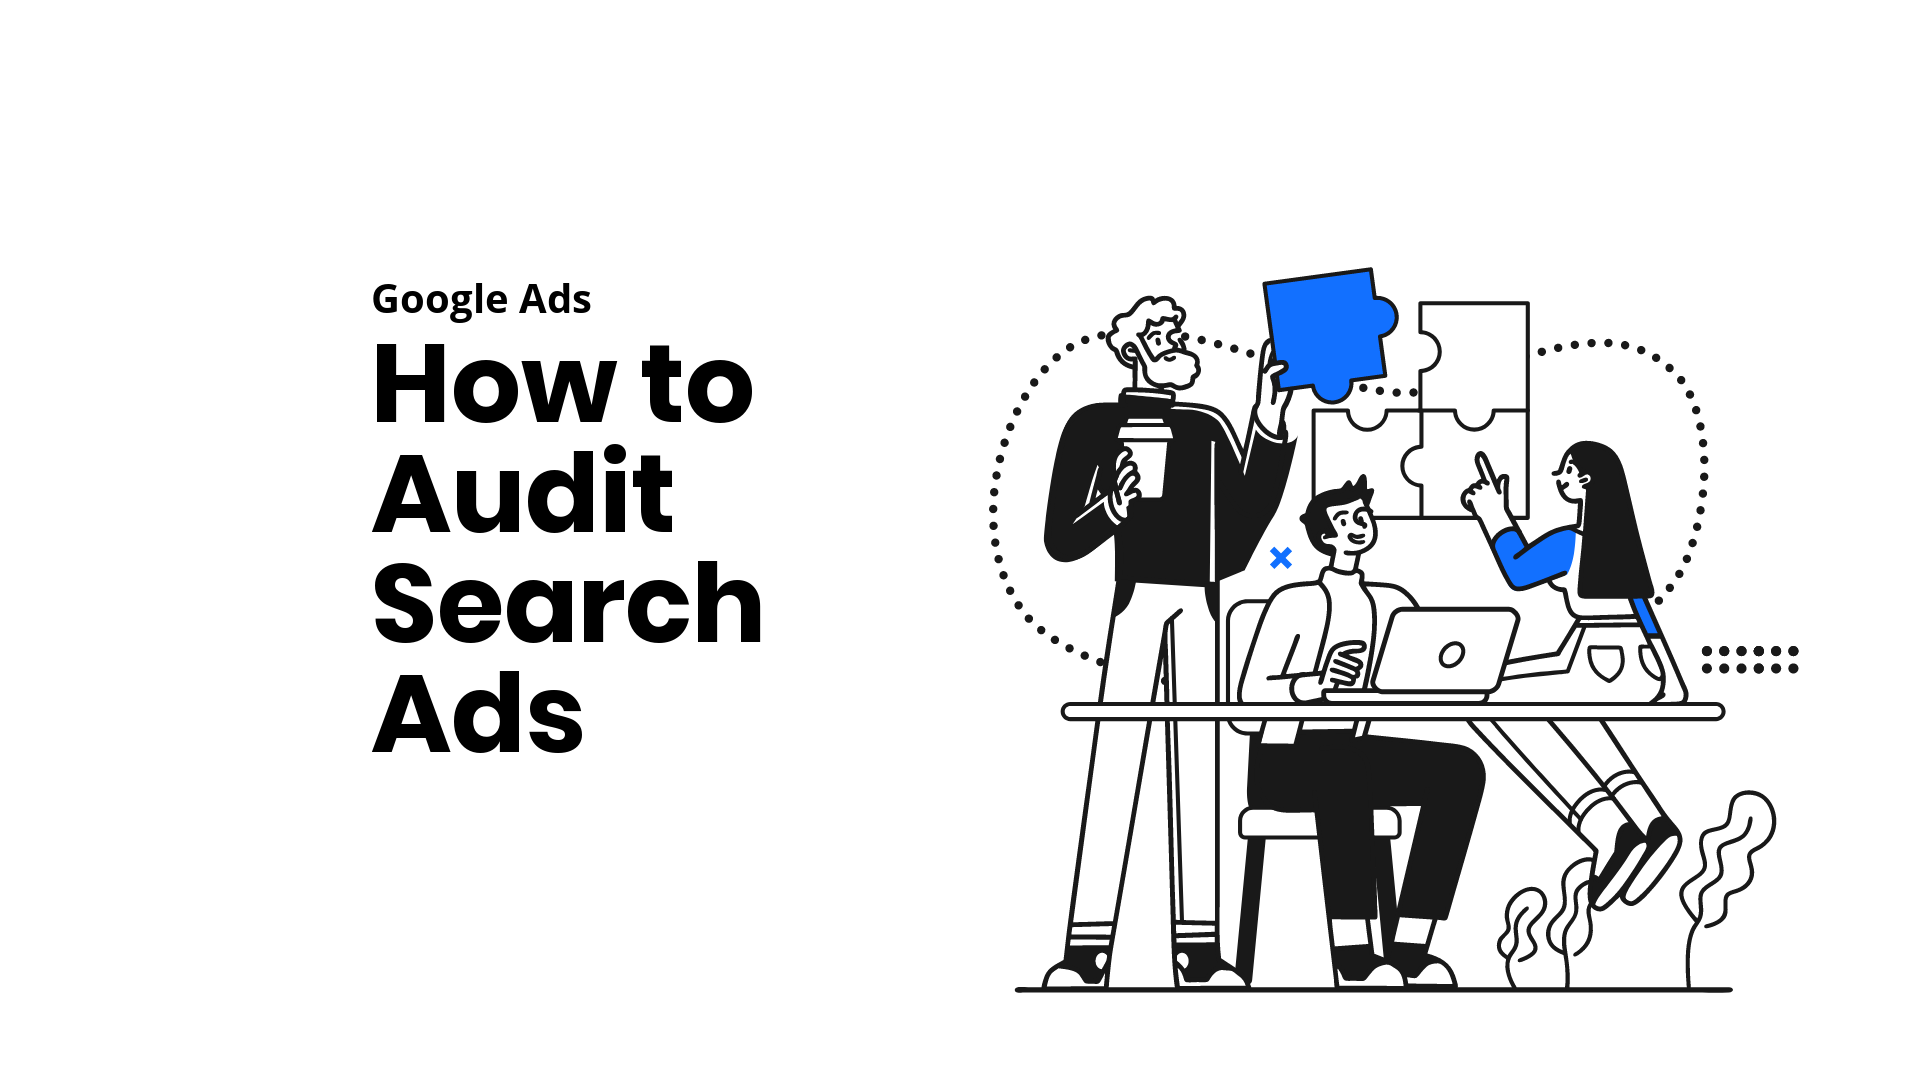 How to audit Google Search ADS